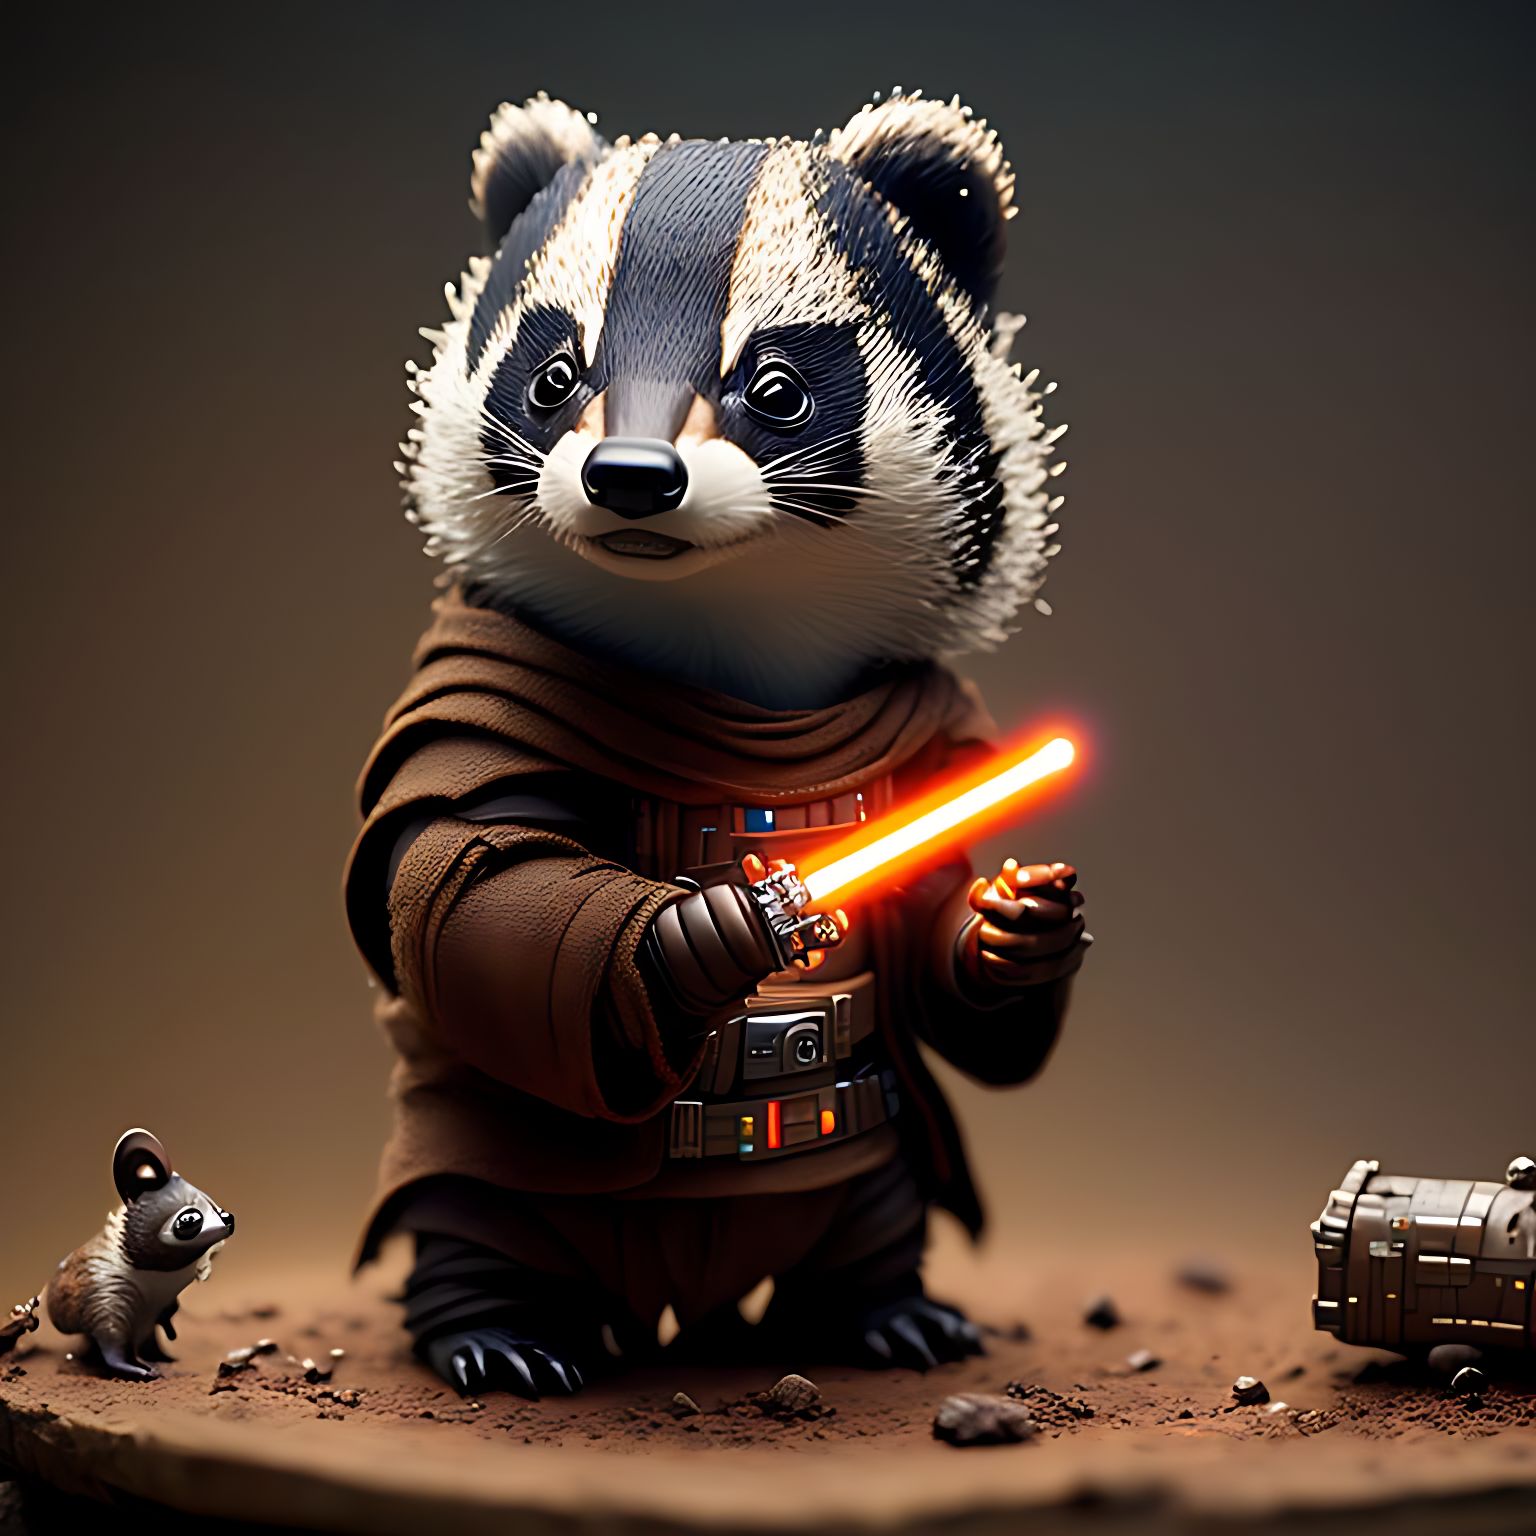 muffled-dove372: A brown badger wearing a Jedi suit with a lightsaber